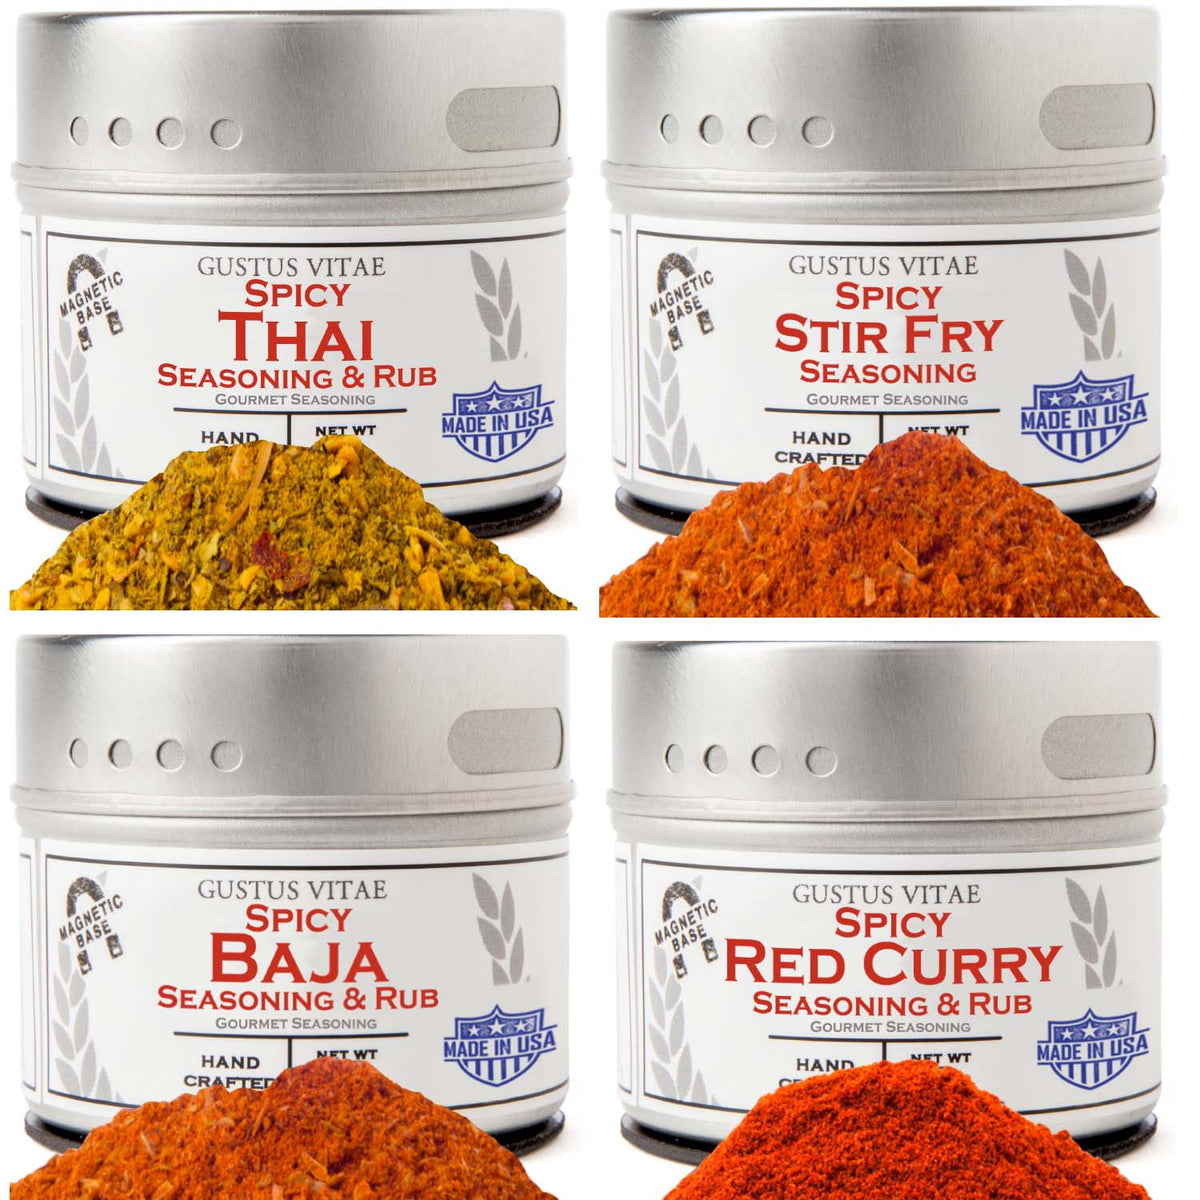 Freshjax Gourmet Organic Spice Blends Not Your Madras Hot Curry Fusion